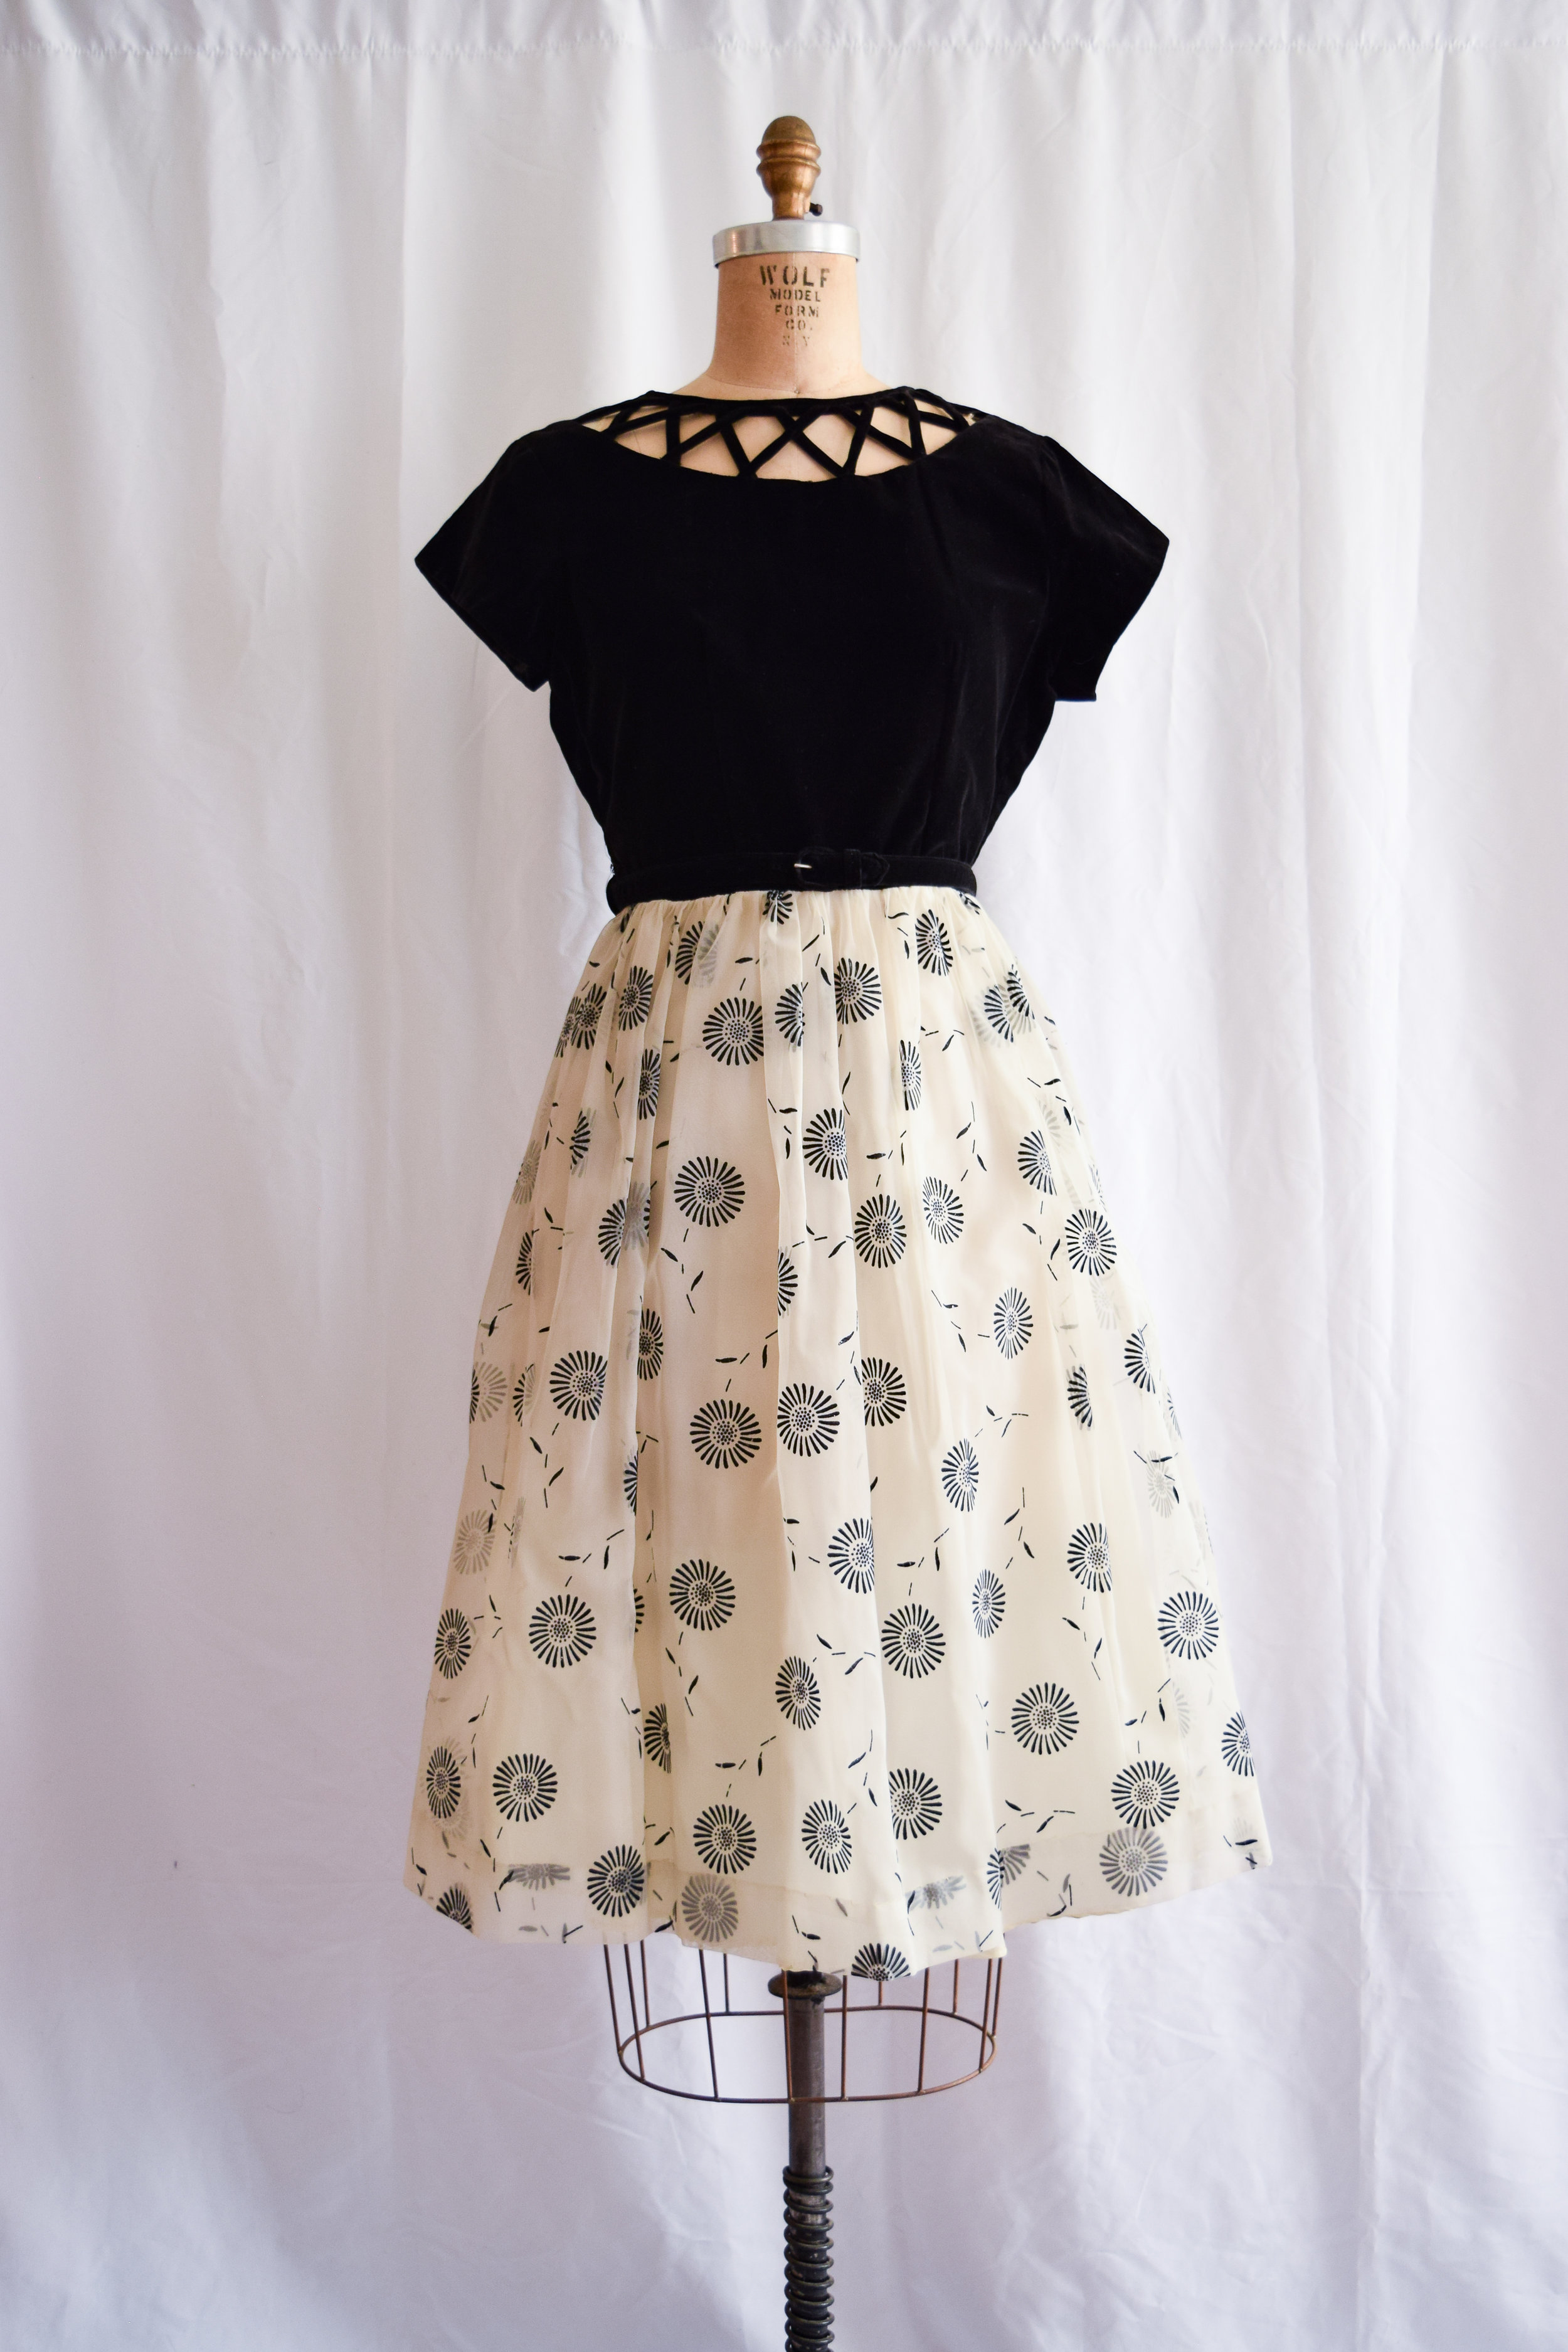 Star Teen. Vintage 1950's Fit and Flare Party Dress Flocked Velvet ...